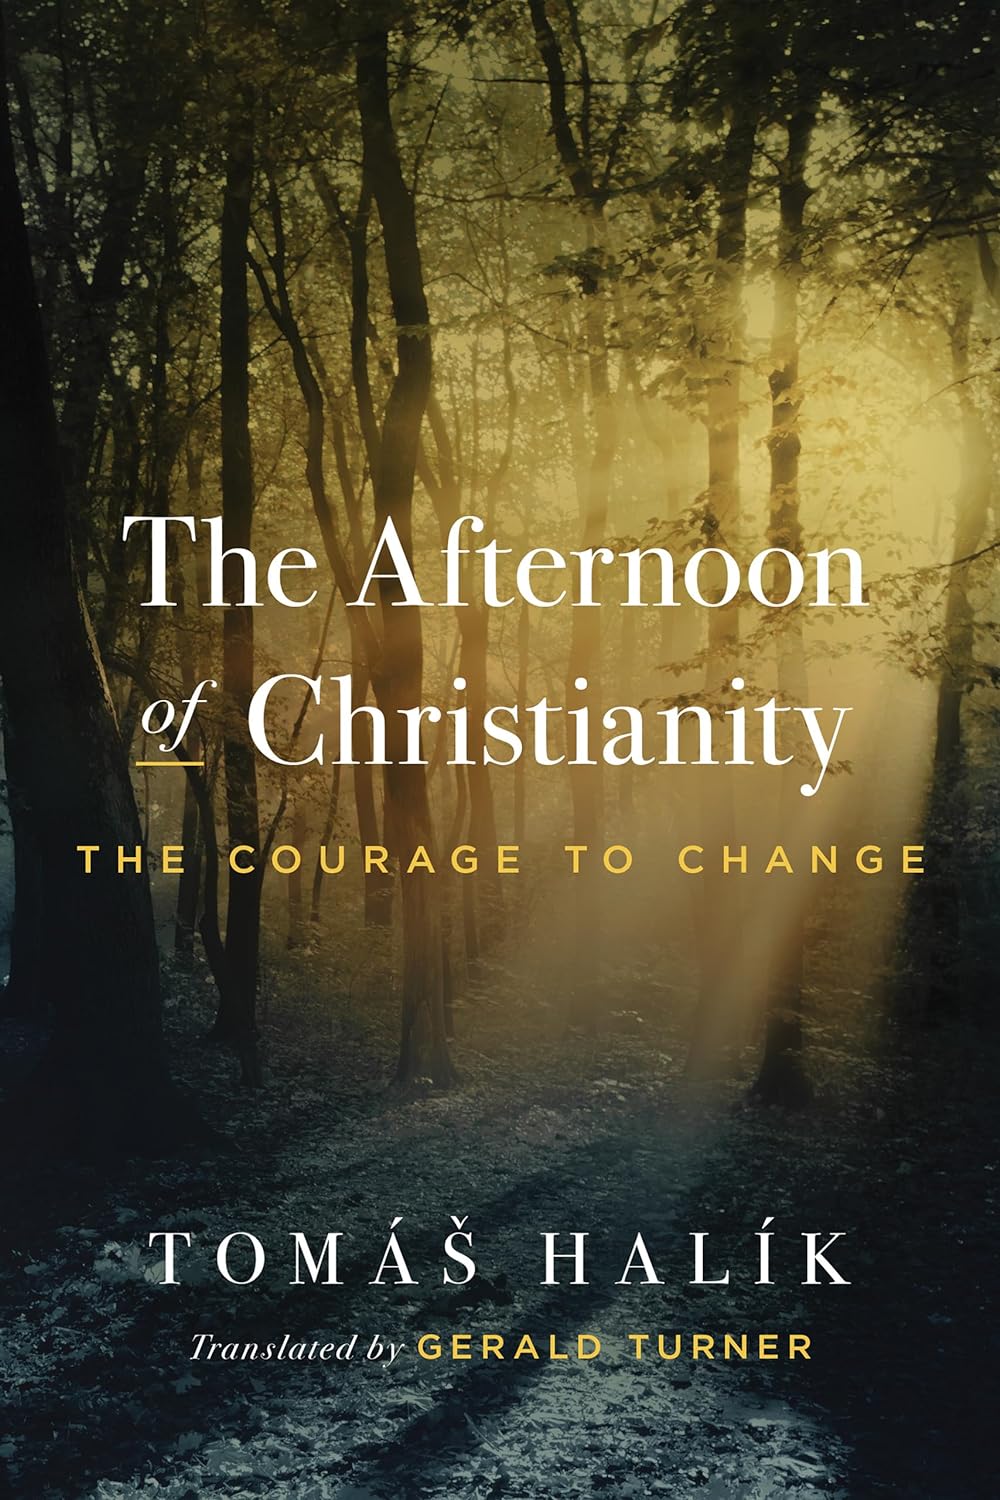 The Afternoon of Christianity: The Courage to Change